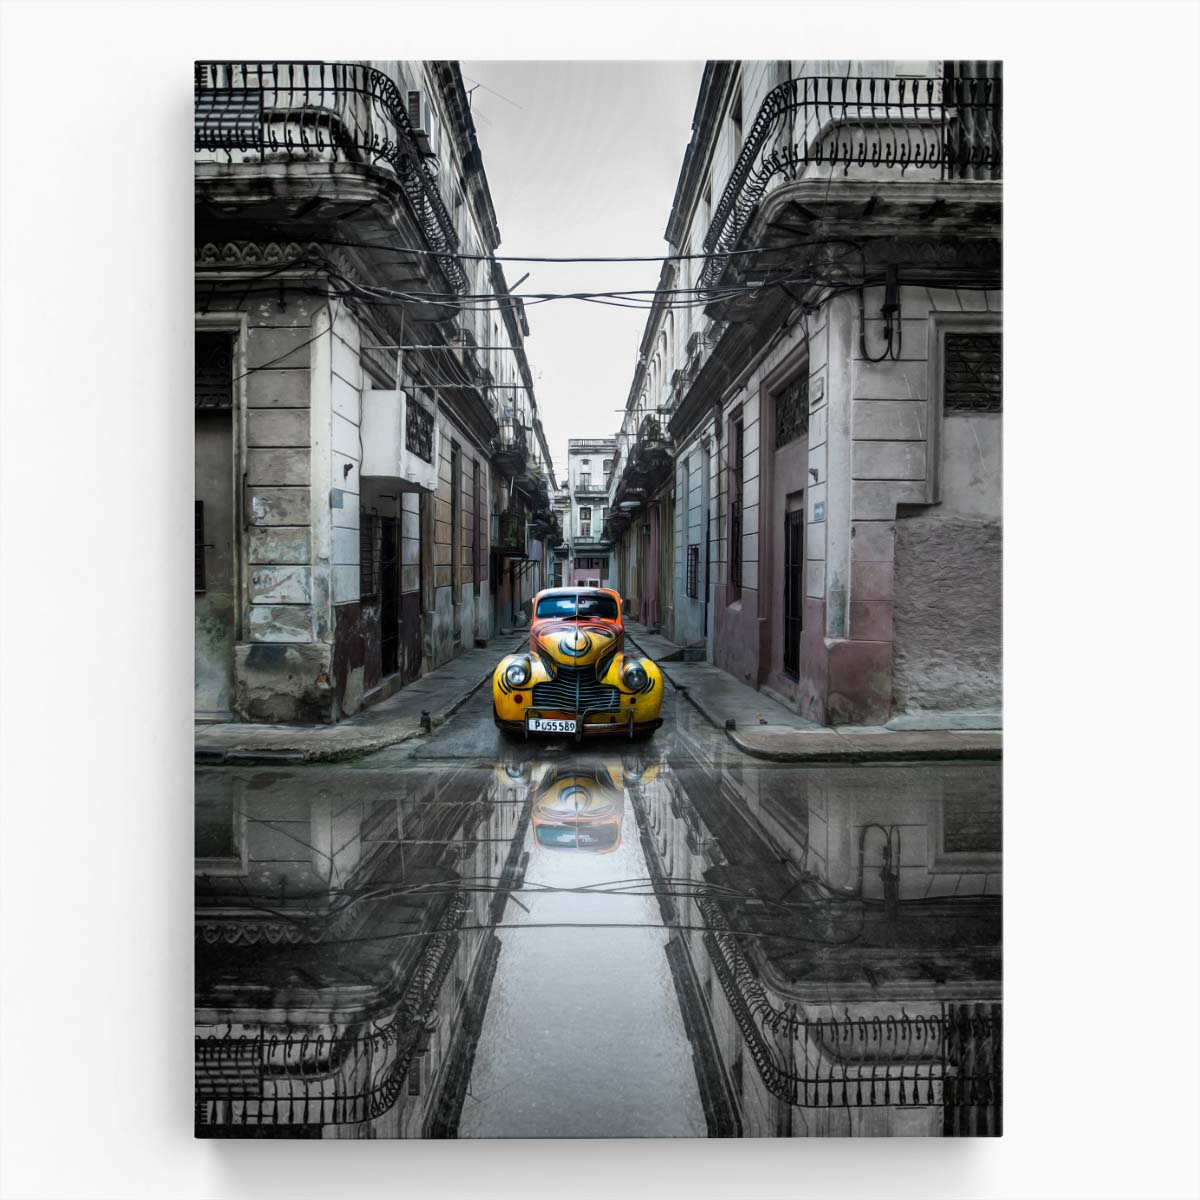 Vintage American Classic Car Street Photography, Havana Cuba by Luxuriance Designs, made in USA